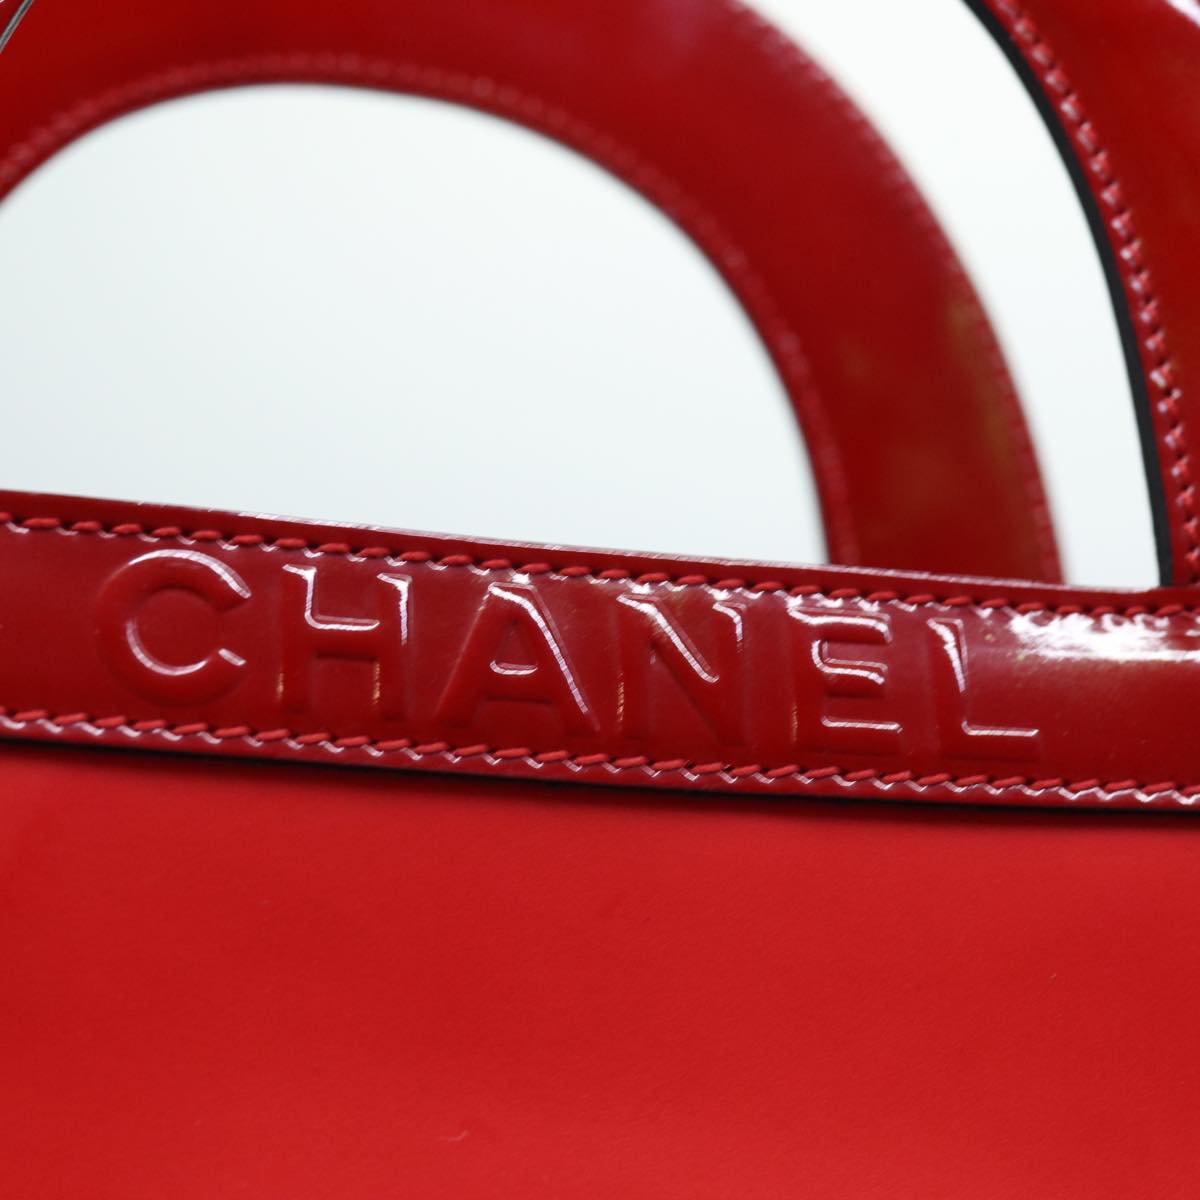 CHANEL Mademoiselle Hand Bag Enamel Leather White Red CC Auth yk12409A